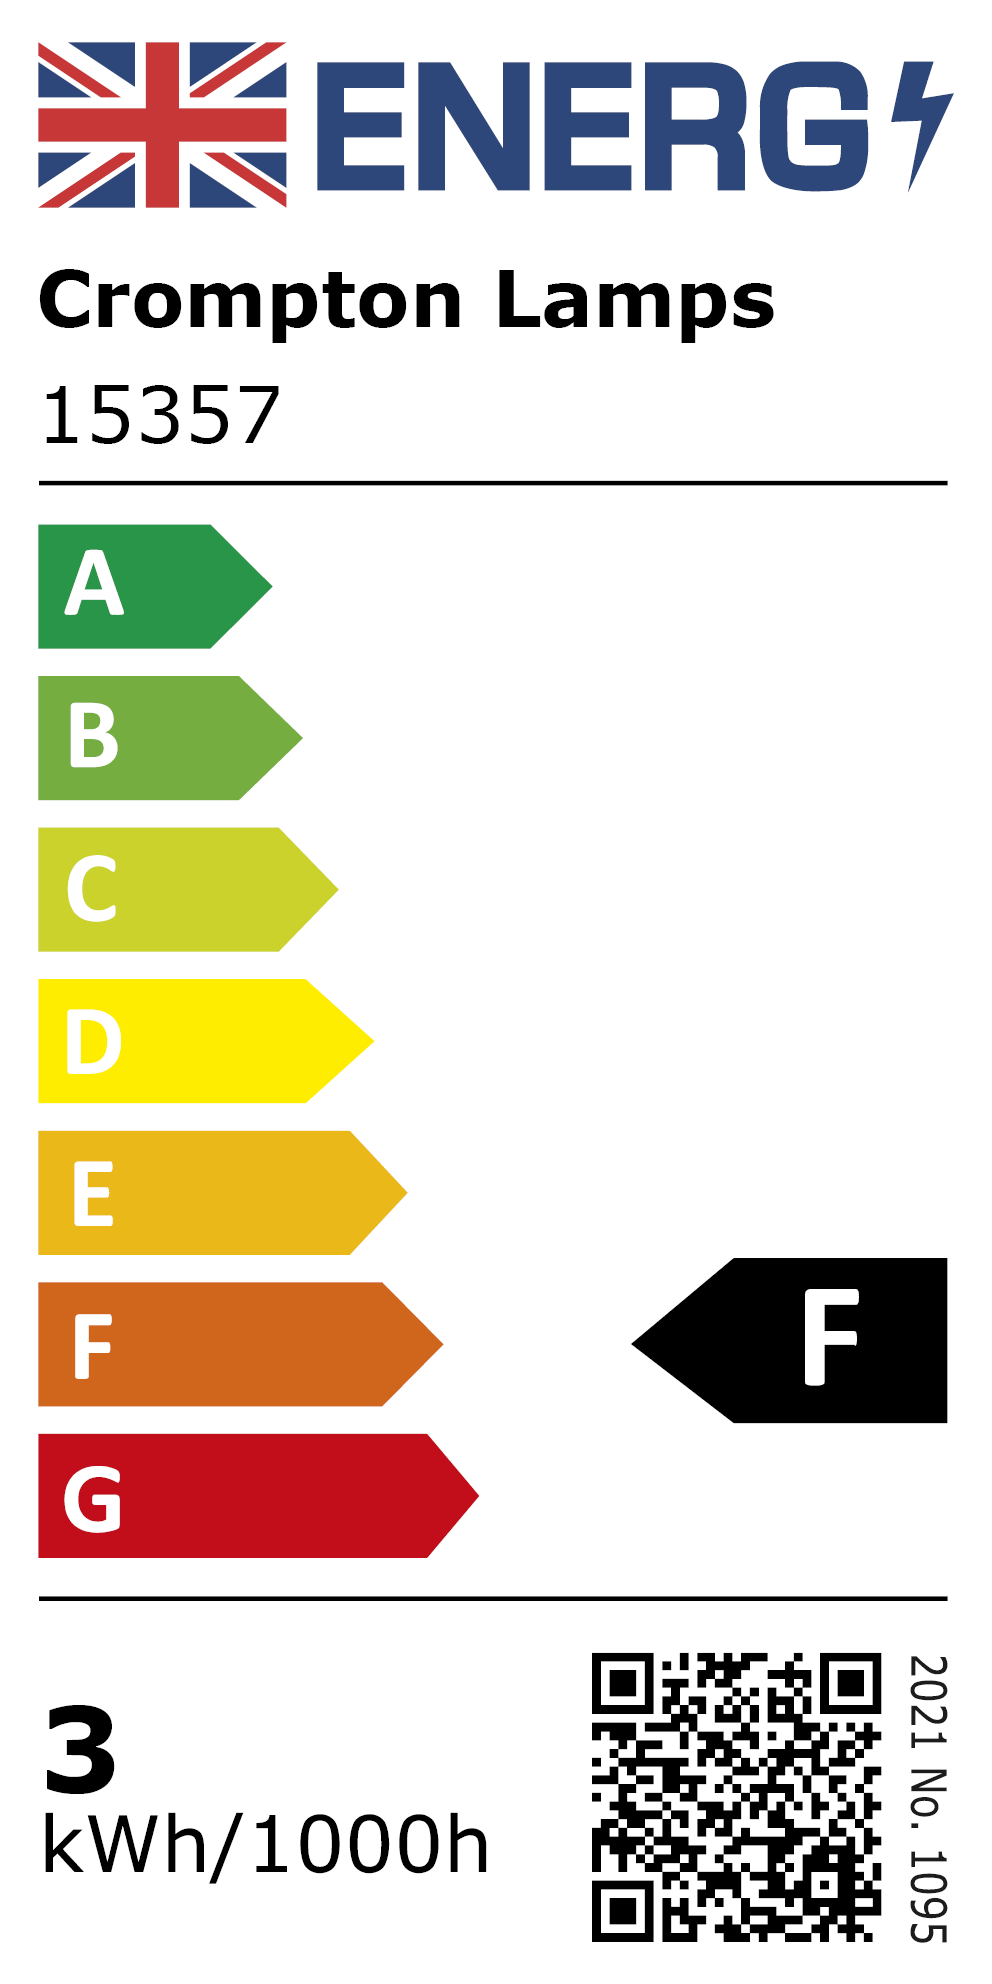 New 2021 Energy Rating Label: MPN 15357